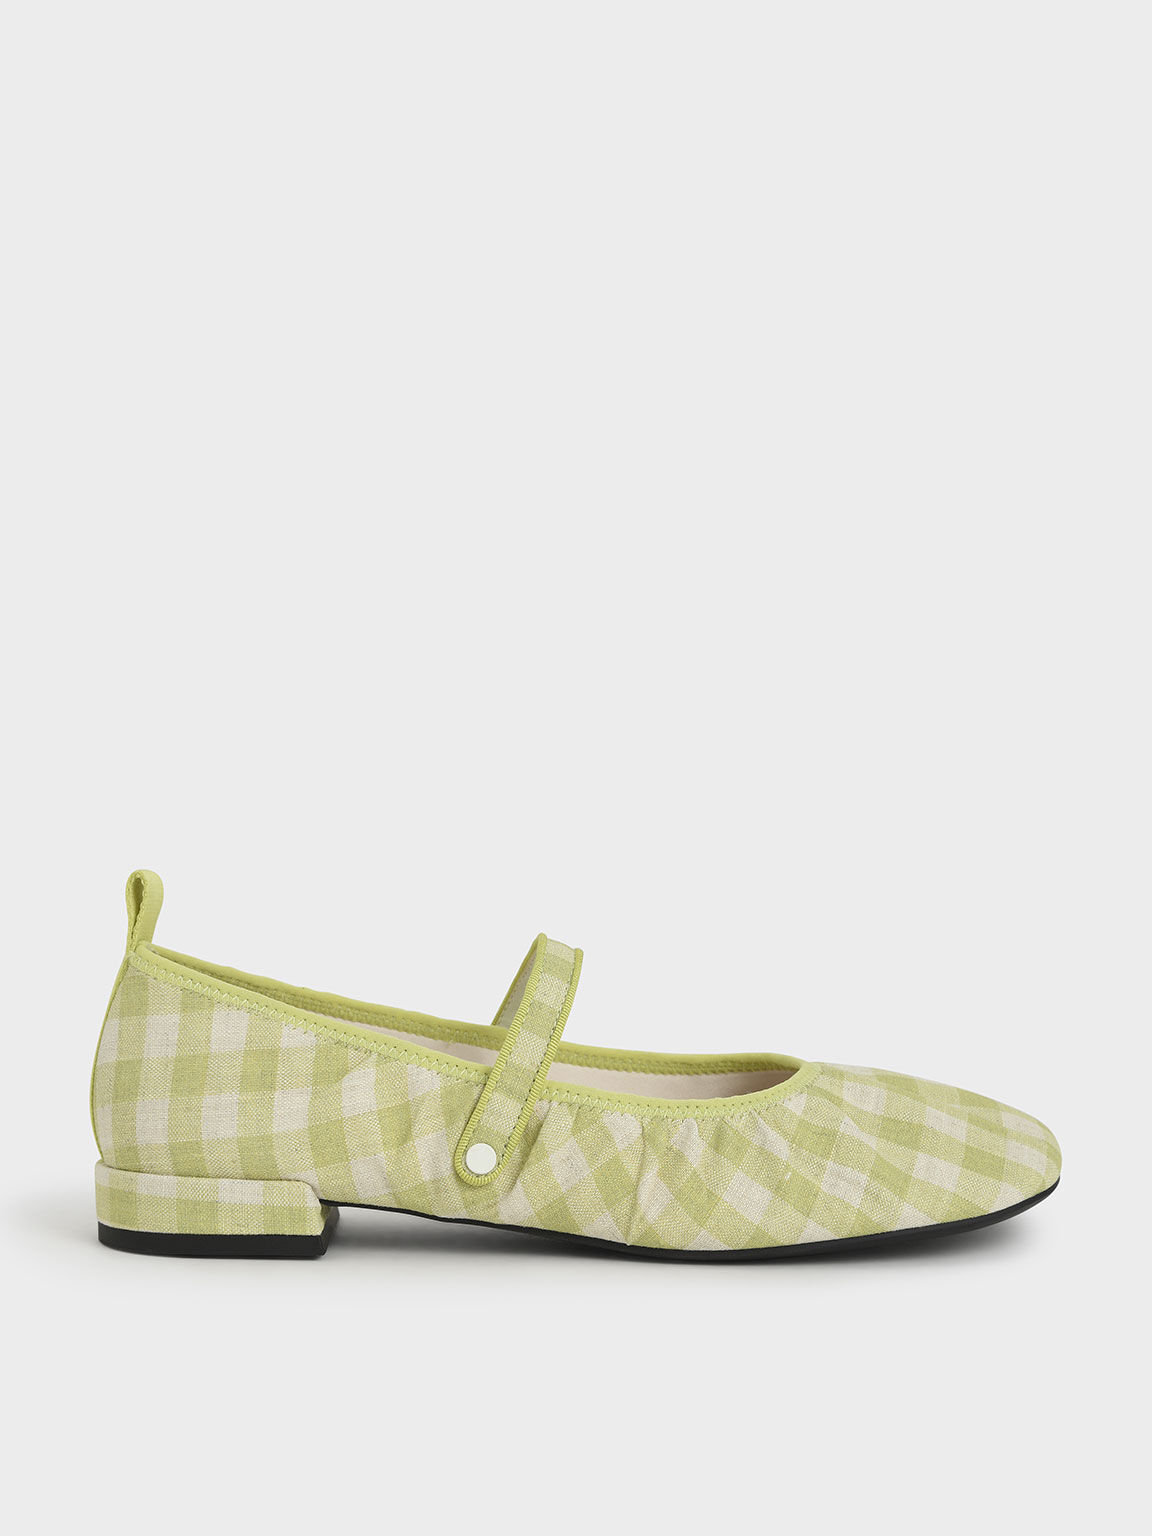 Woven Gingham Mary Janes, Green, hi-res